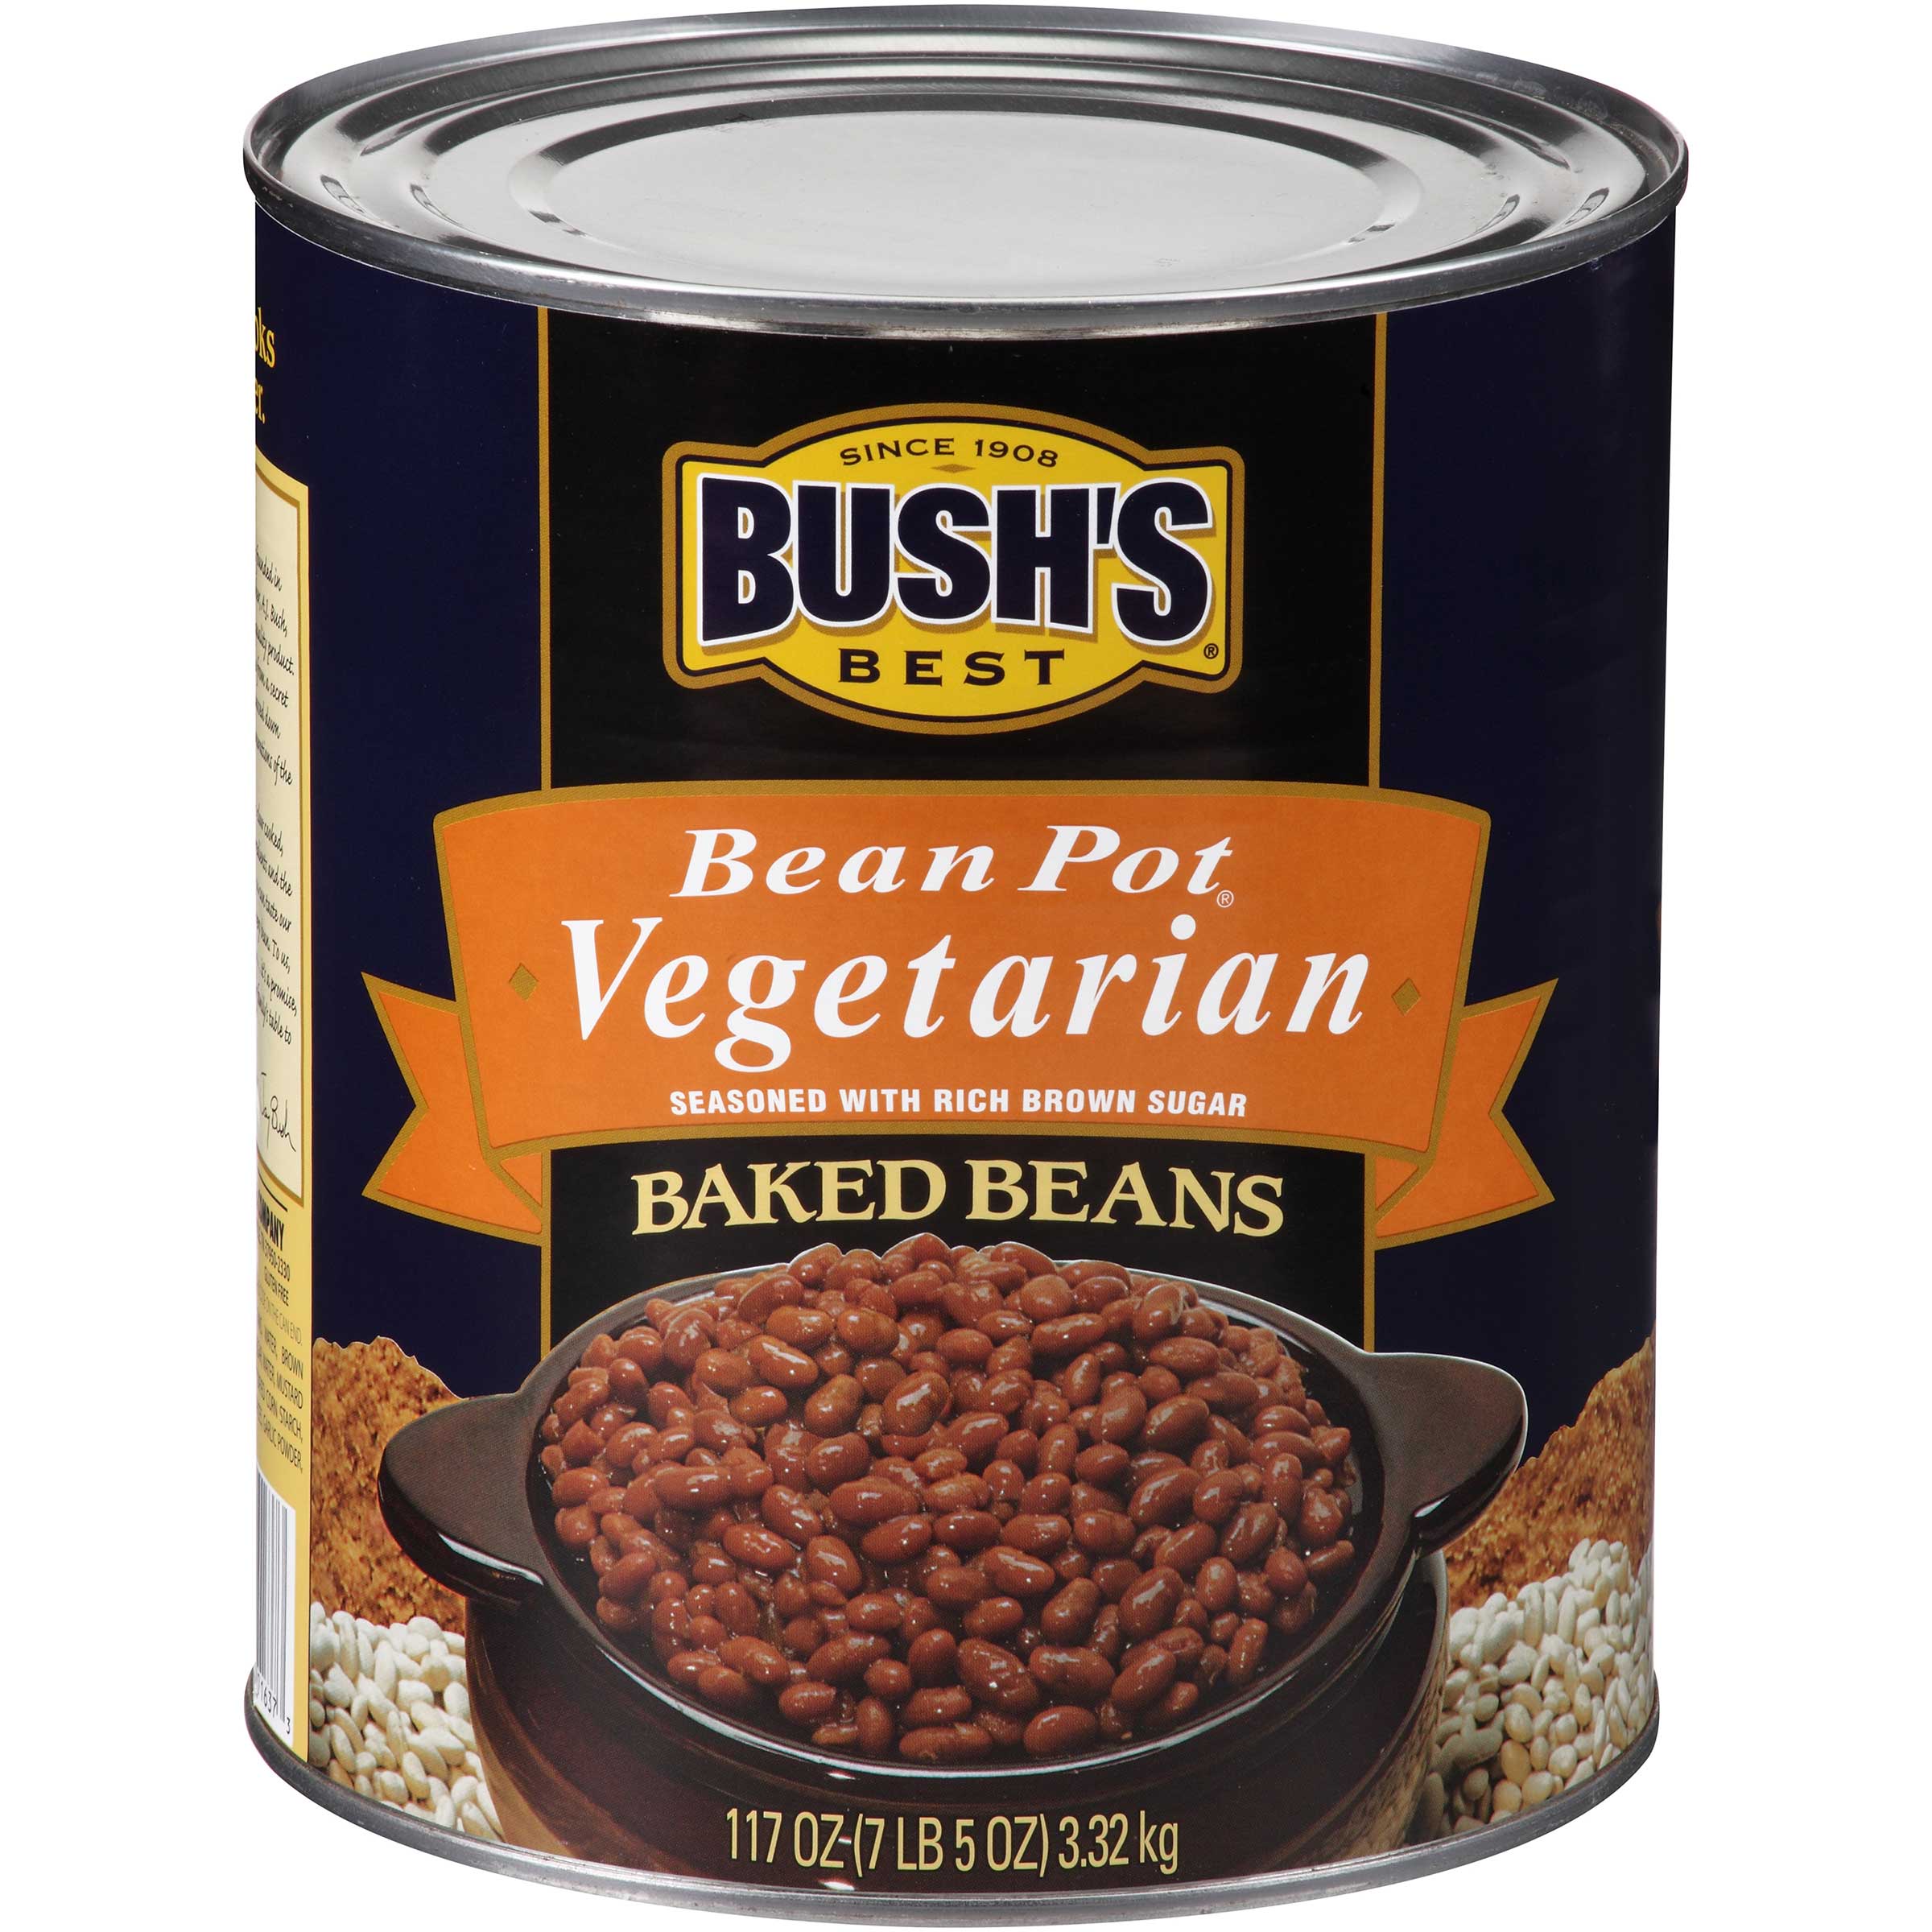 Solved: A half-cup serving of Bush's Vegetarian Baked Beans